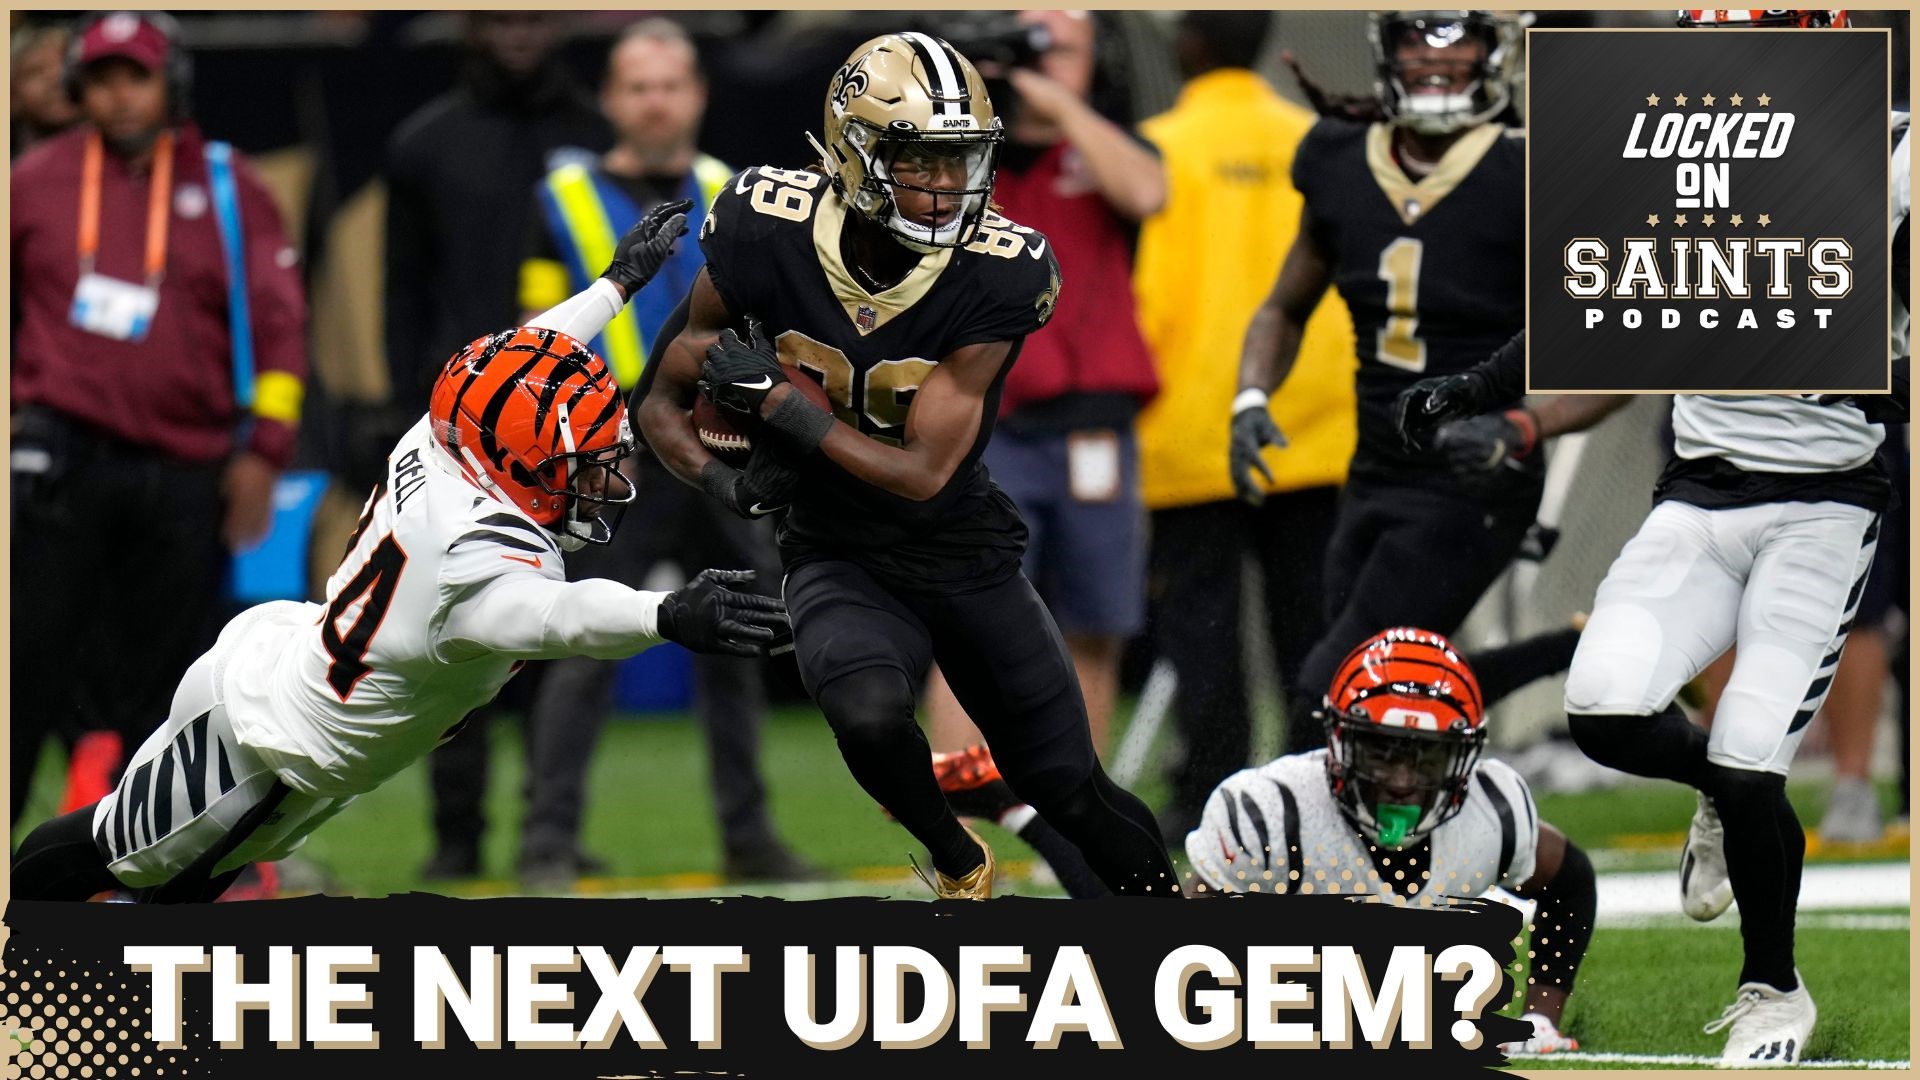 New Orleans Saints wide receiver Rashid Shaheed showed his explosive ability with his 44-yard touchdown run. Could he bet he next UDFA gem on the Saints roster?